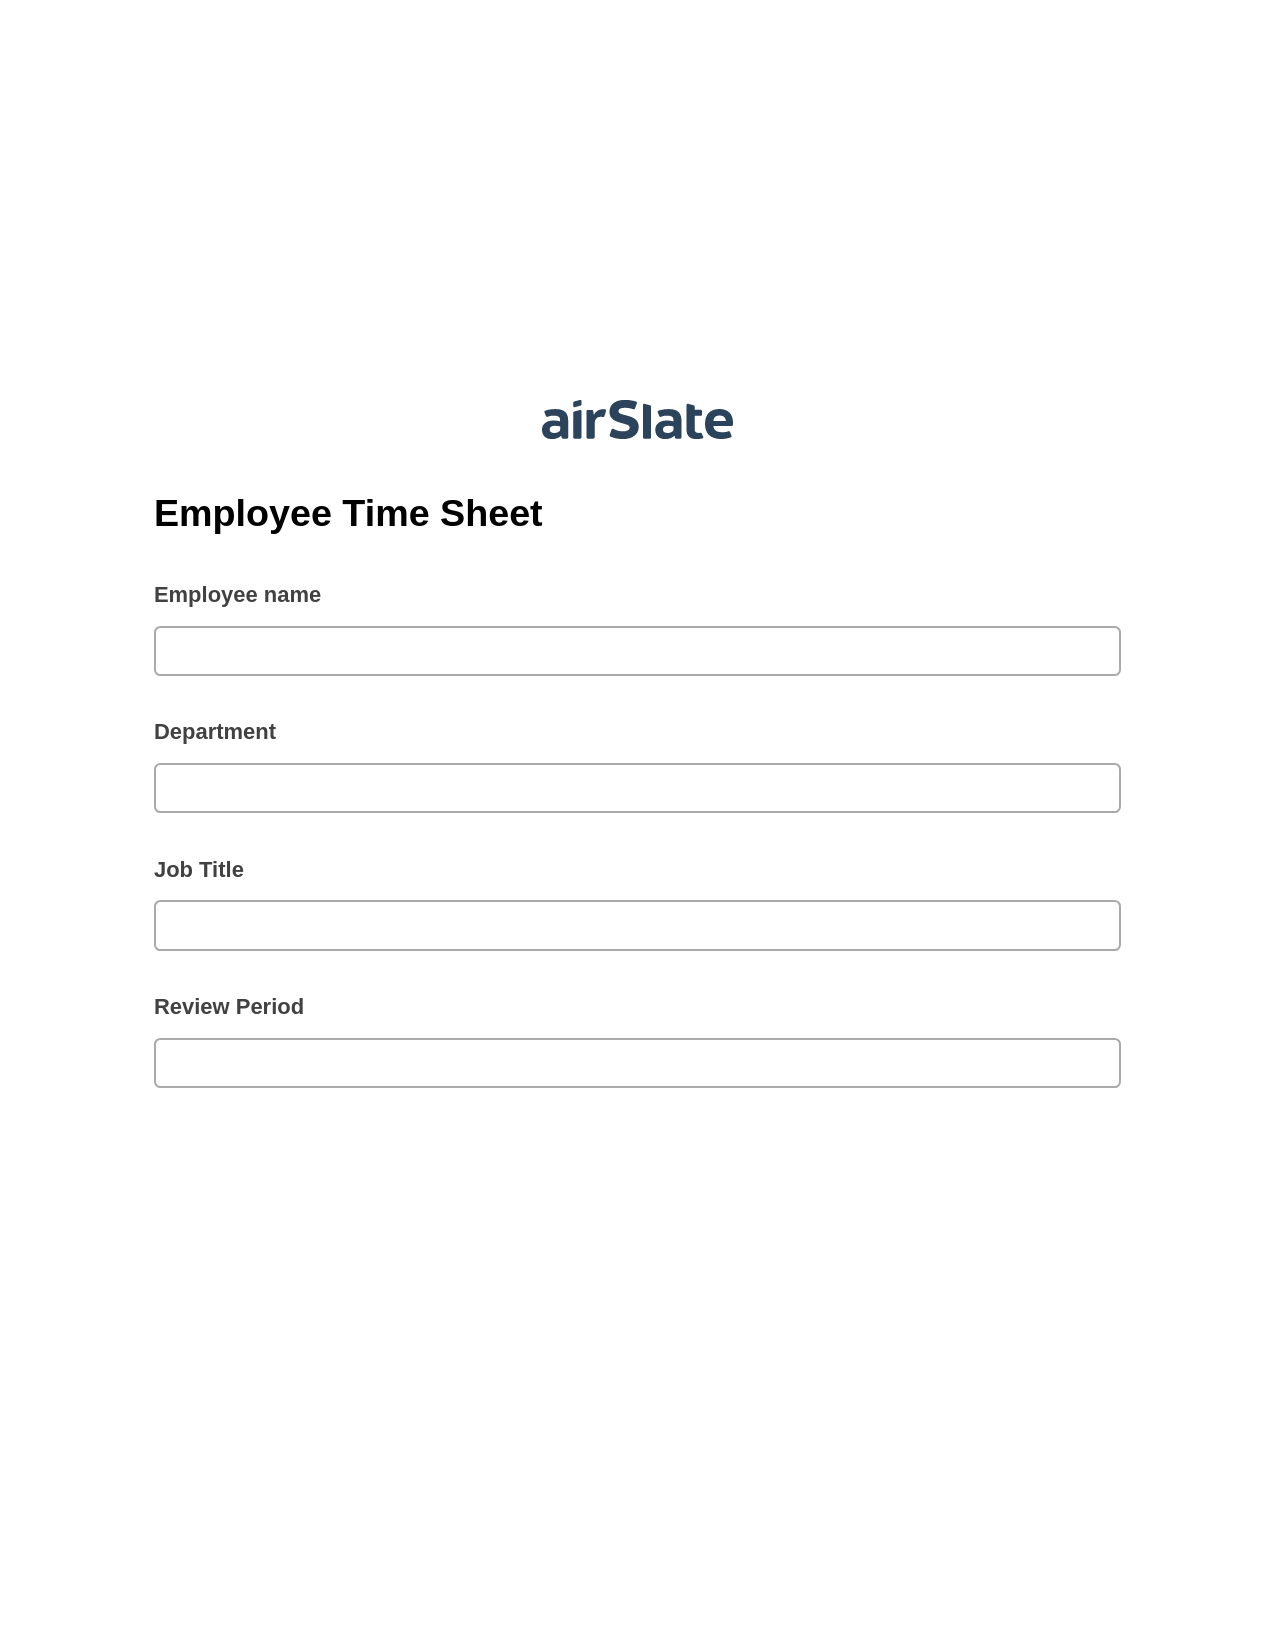 Employee Time Sheet Pre-fill Dropdowns from Airtable, Create Salesforce Records Bot, Archive to Dropbox Bot